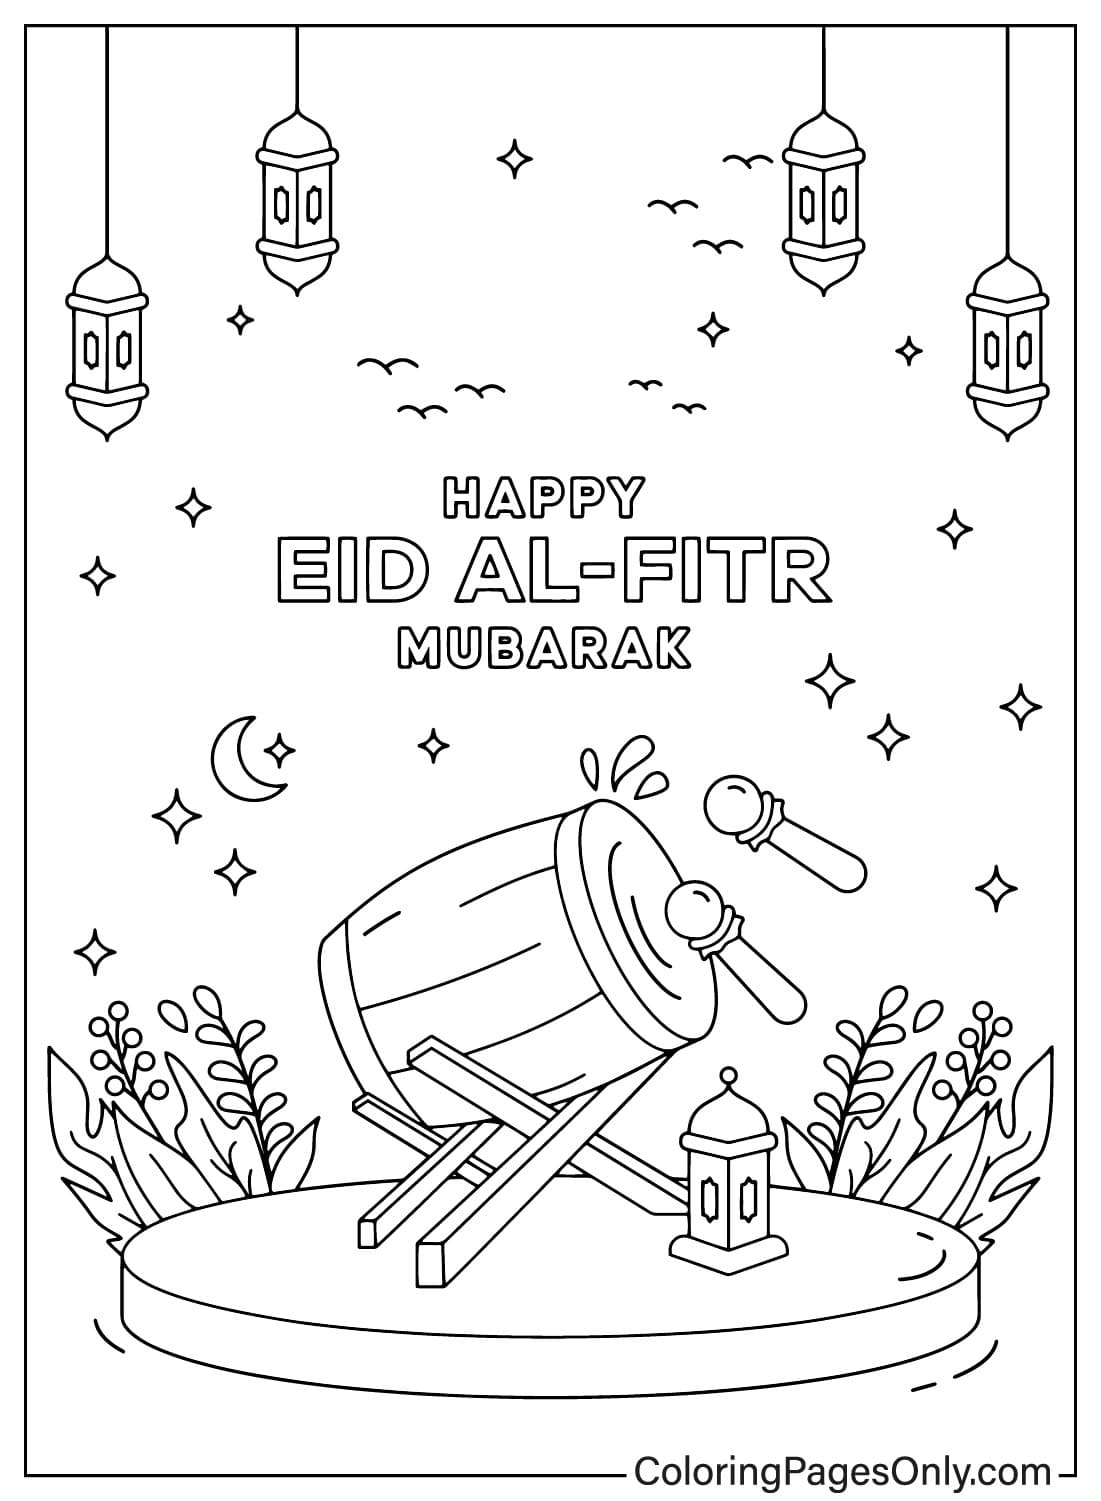 Pictures Eid Al-Fitr Coloring Page from Eid Al-Fitr